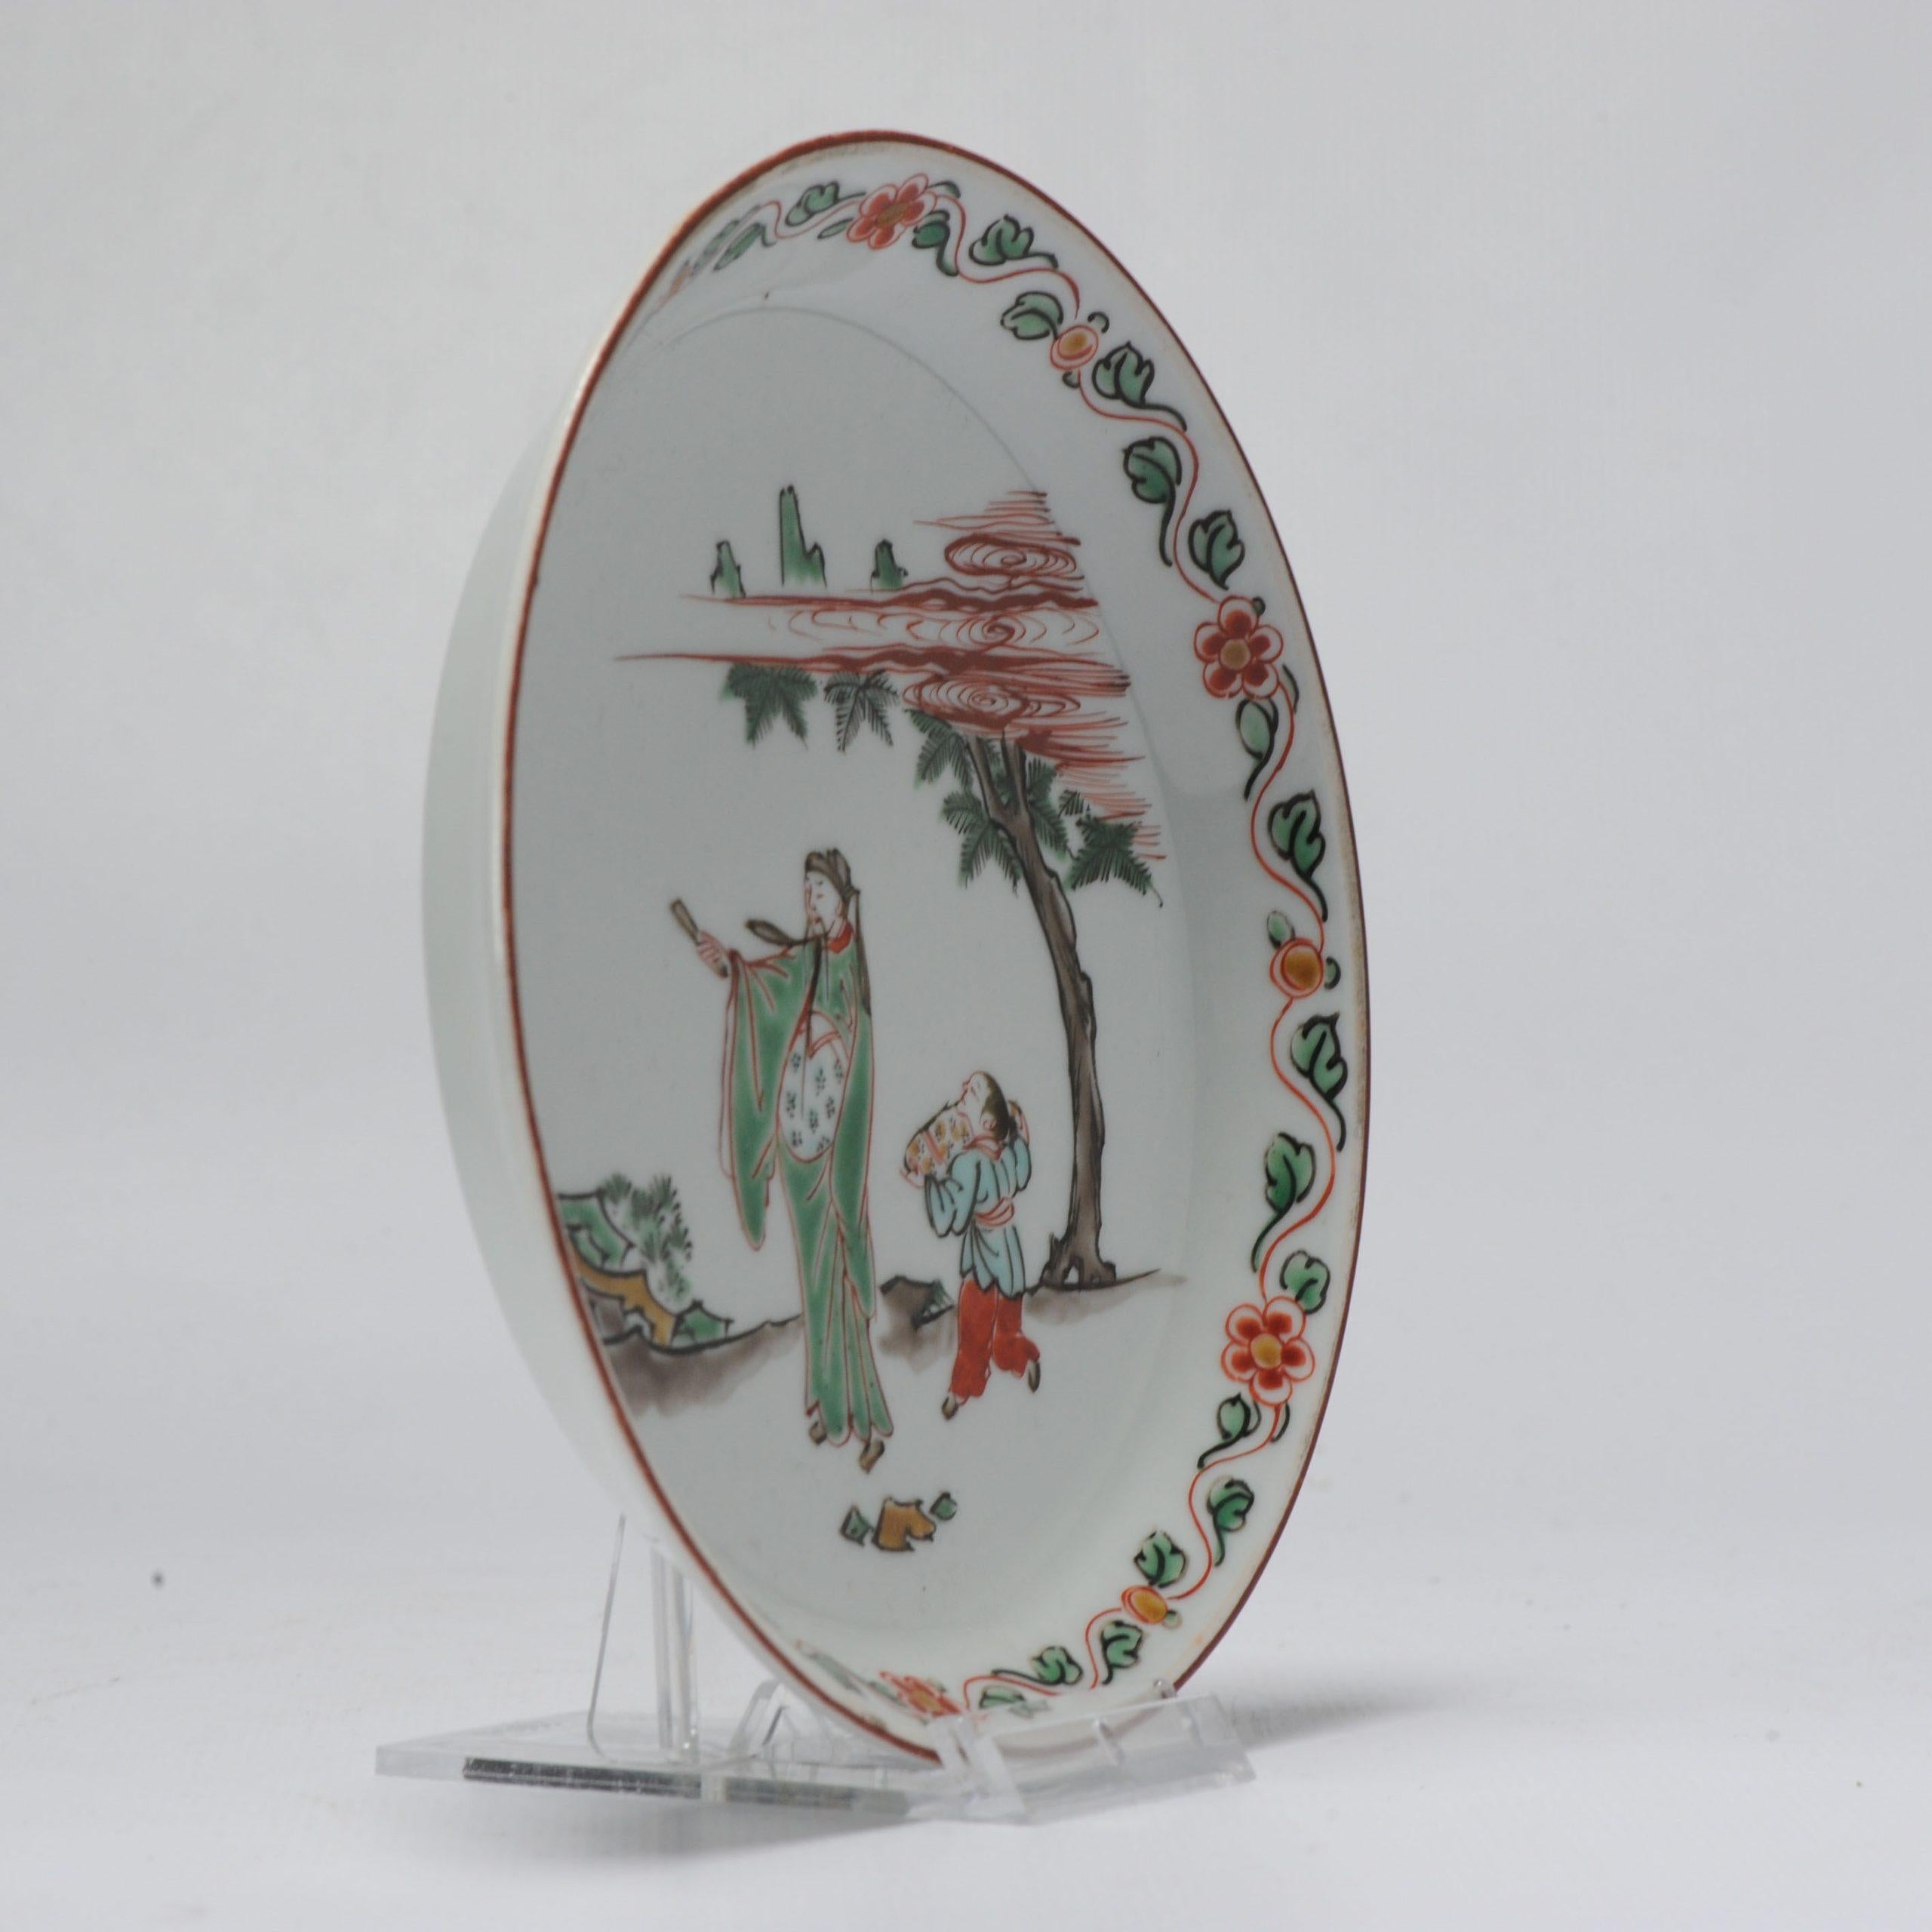 A lovely dish in the style of Ming/Transitional Chinese Ko Akae wares. This is a 1 on 1 copy of the same dish from China from the 17th century. We think this is a 19th century version, but since not sure we put it as 19th/20th.

Central scene of a